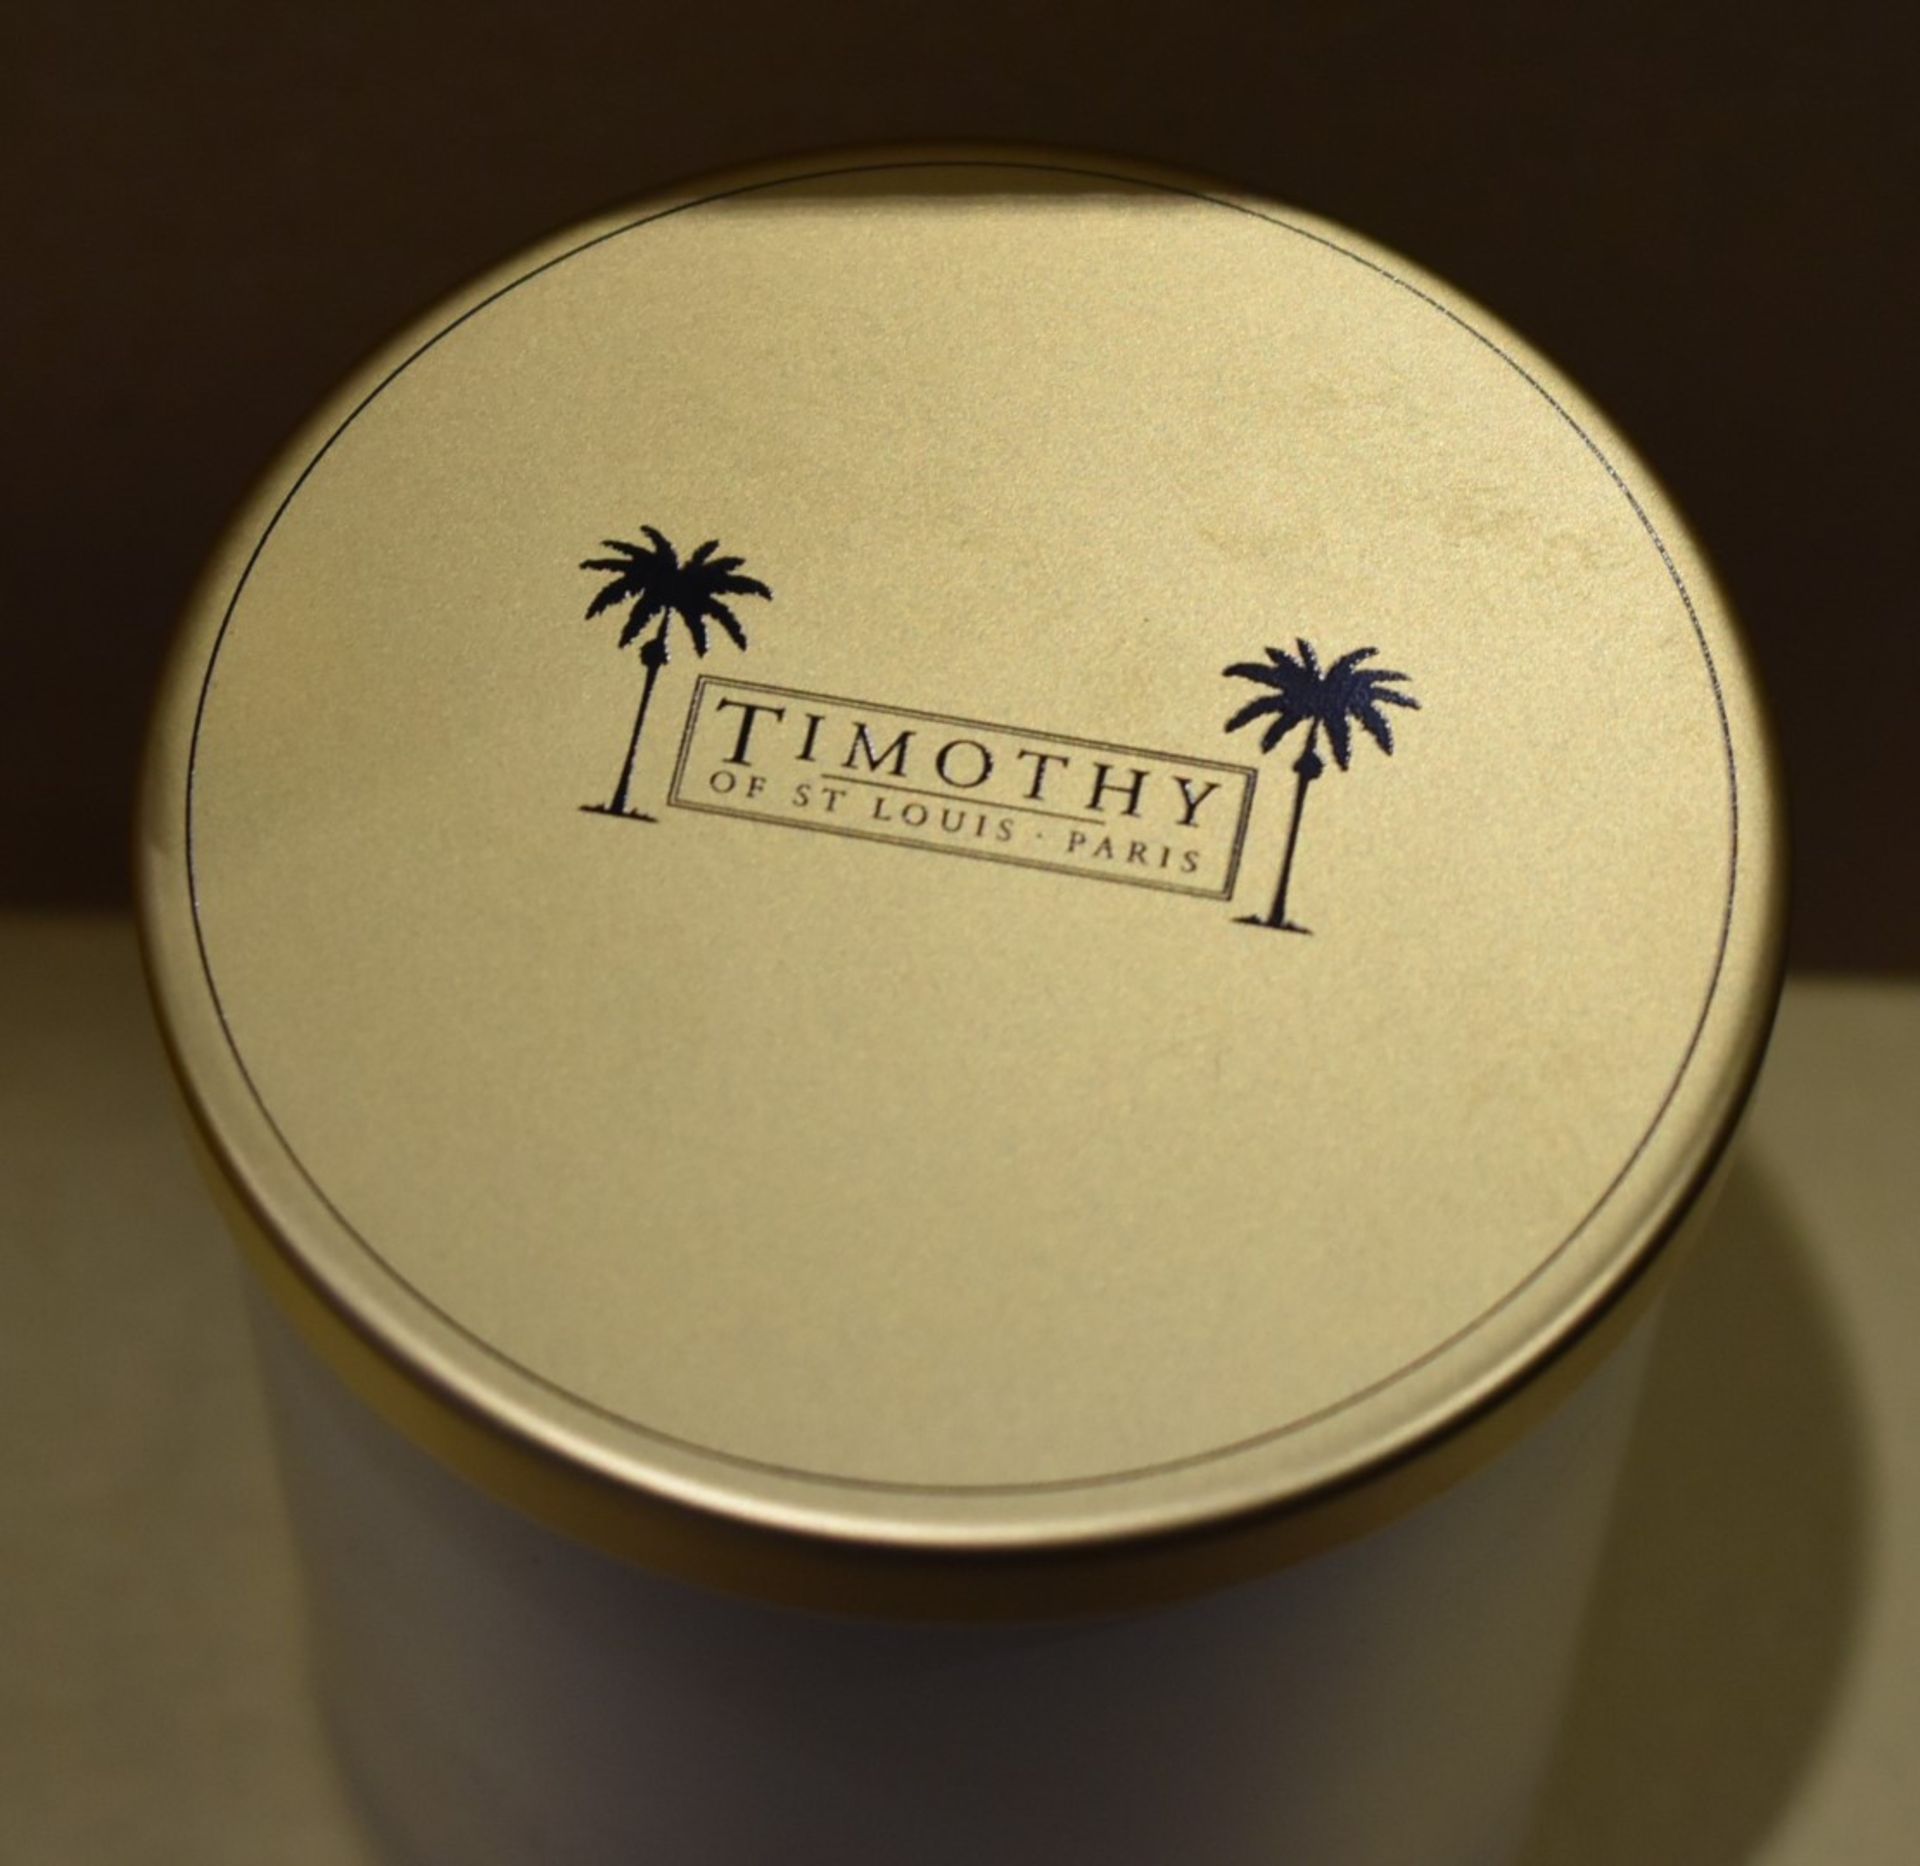 2 x Timothy of St Louis Perfumed Candle - Santal & Frangipanier - Brand New and Boxed - 150g Scented - Image 5 of 5